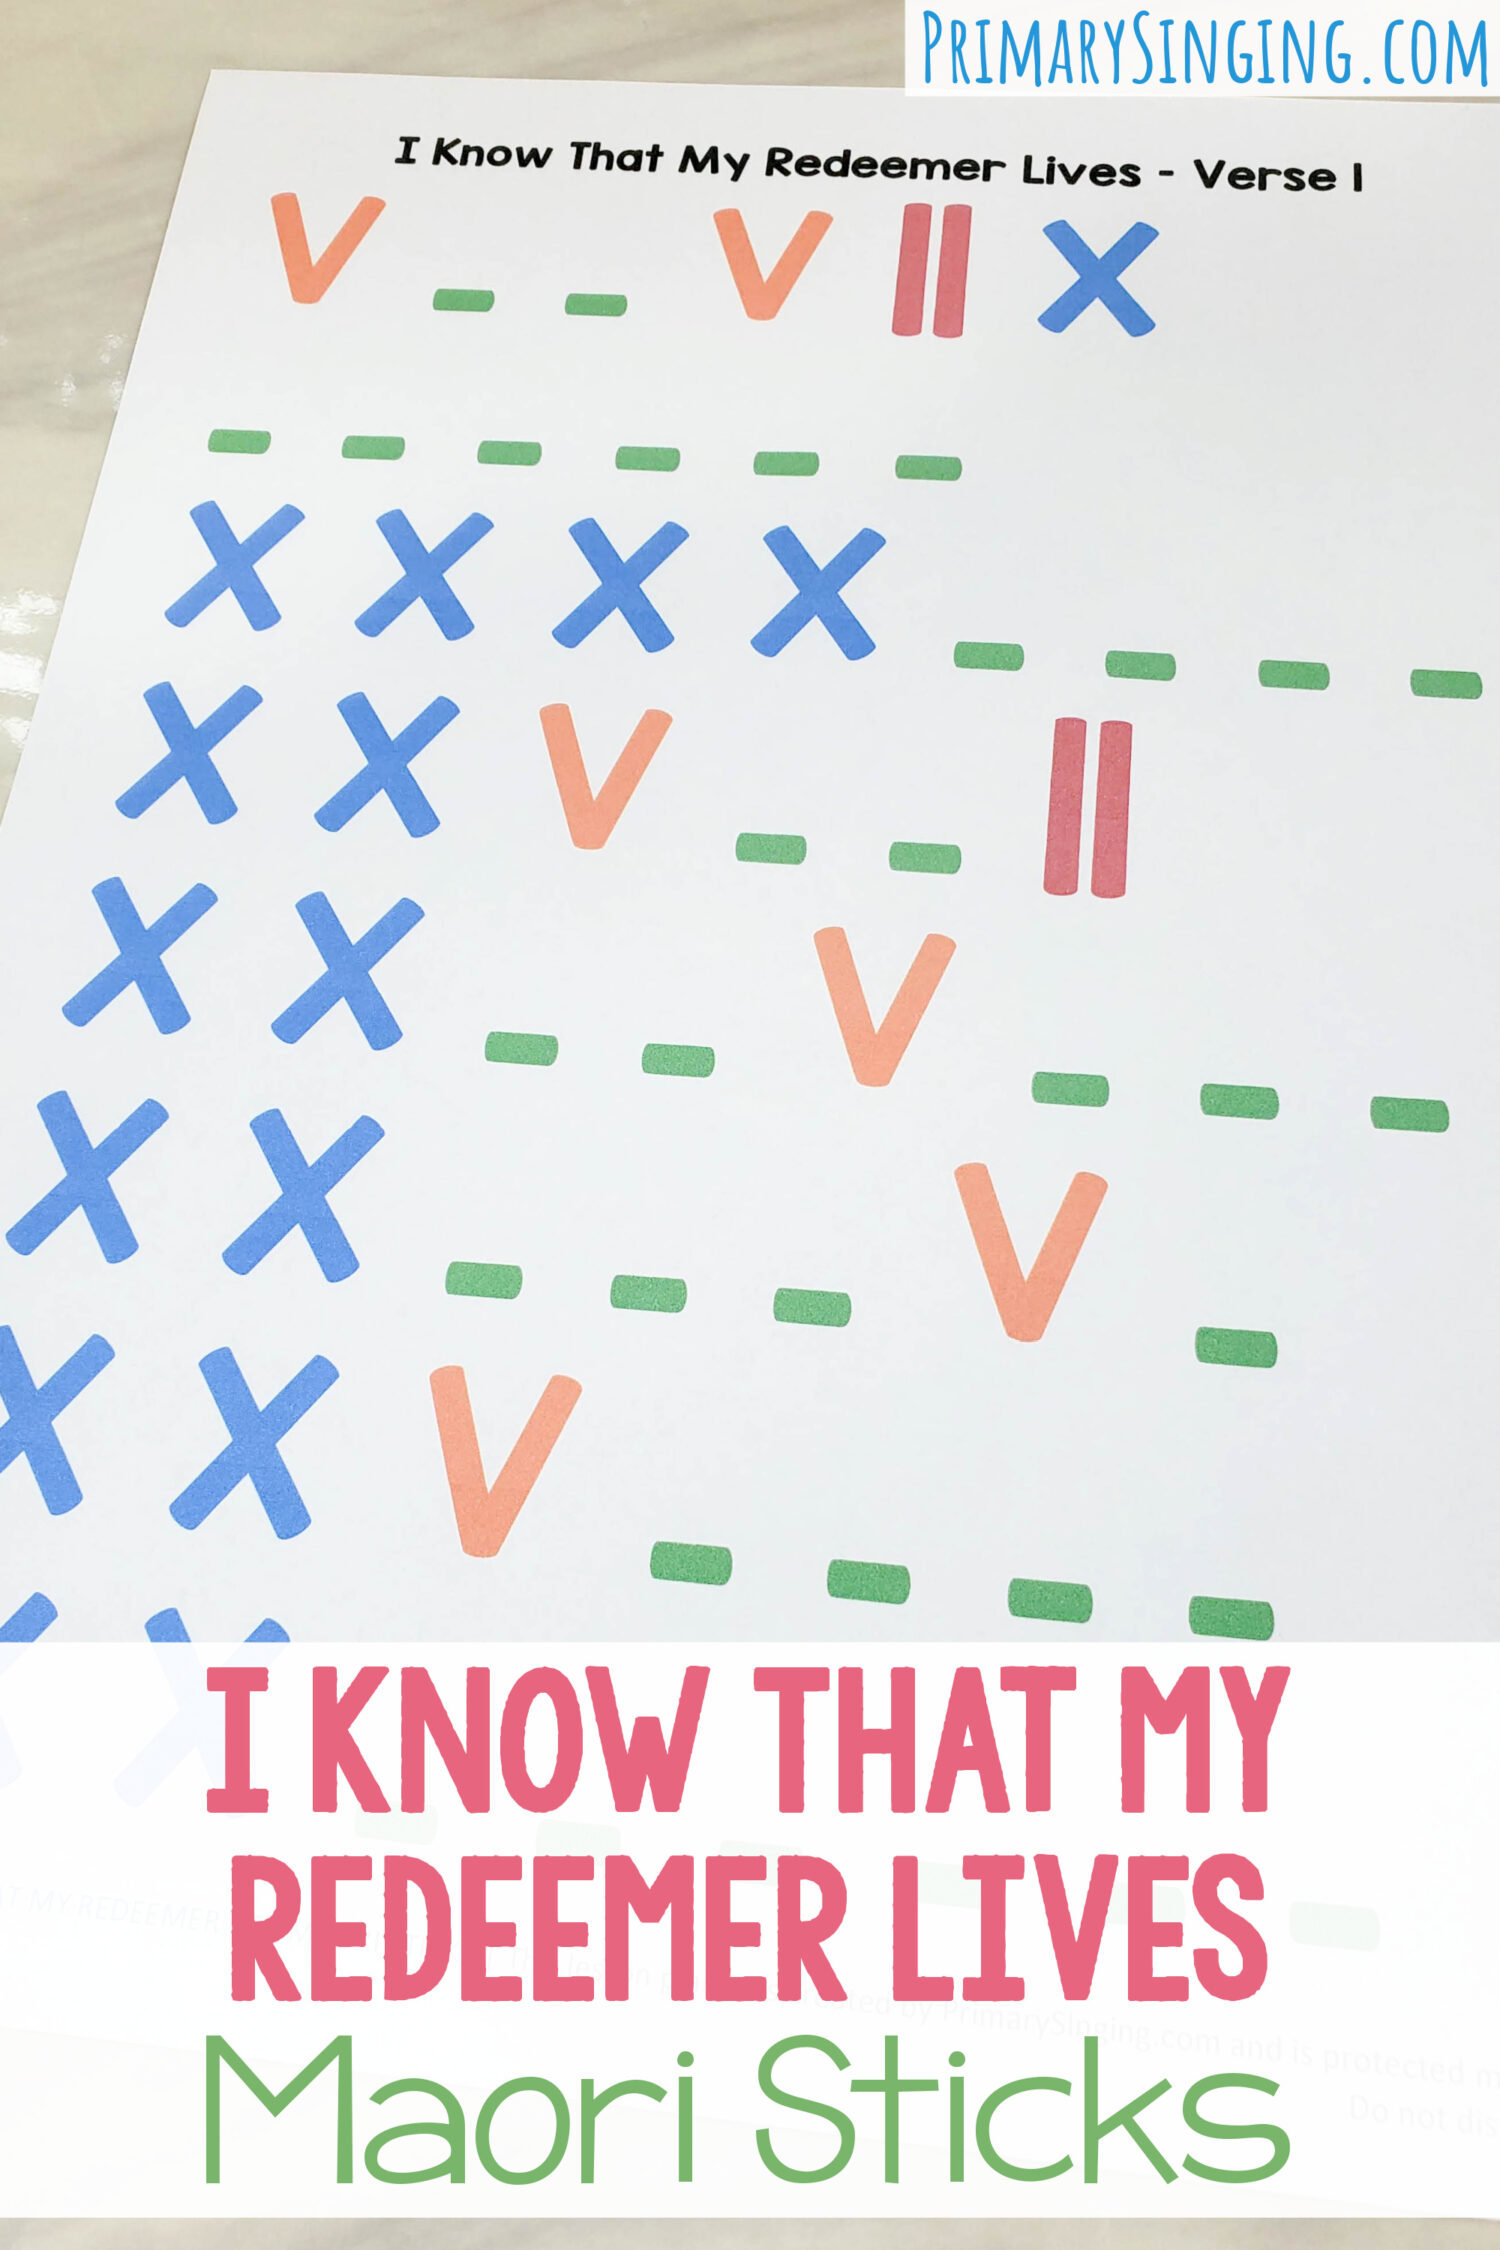 I Know That My Redeemer Lives Maori Sticks super fun and engaging singing time activity with printable pattern chart for LDS Primary music leaders.